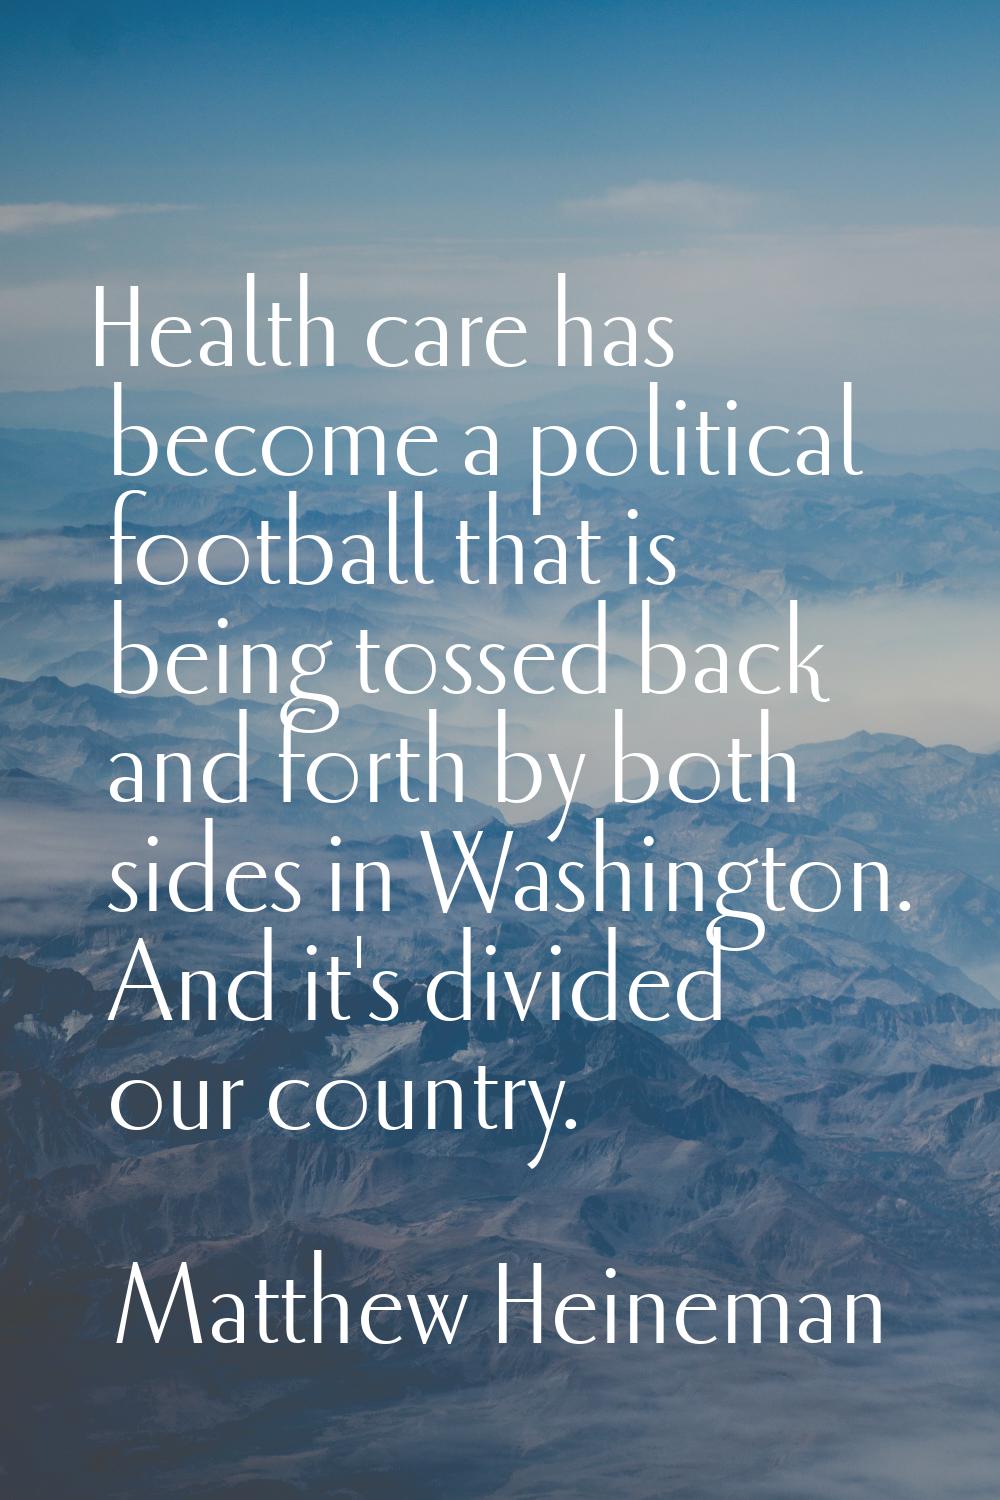 Health care has become a political football that is being tossed back and forth by both sides in Wa